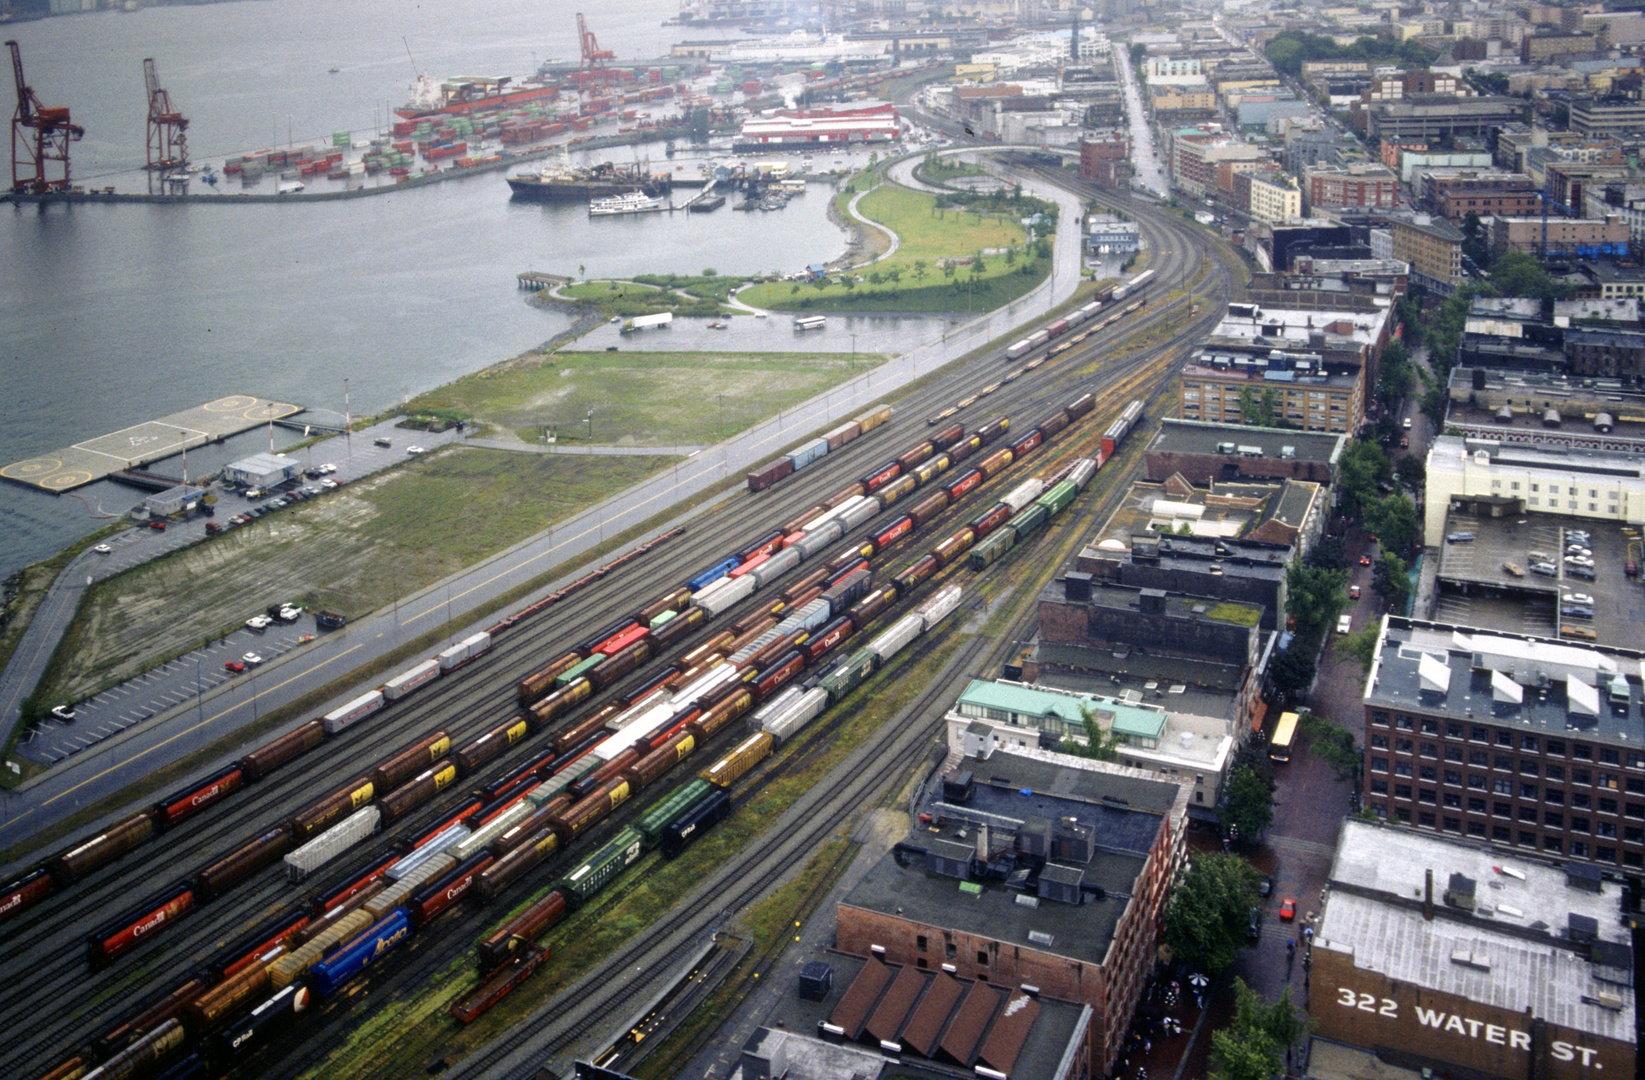 Canadian Pacfic Yard in Vancouver, Canada